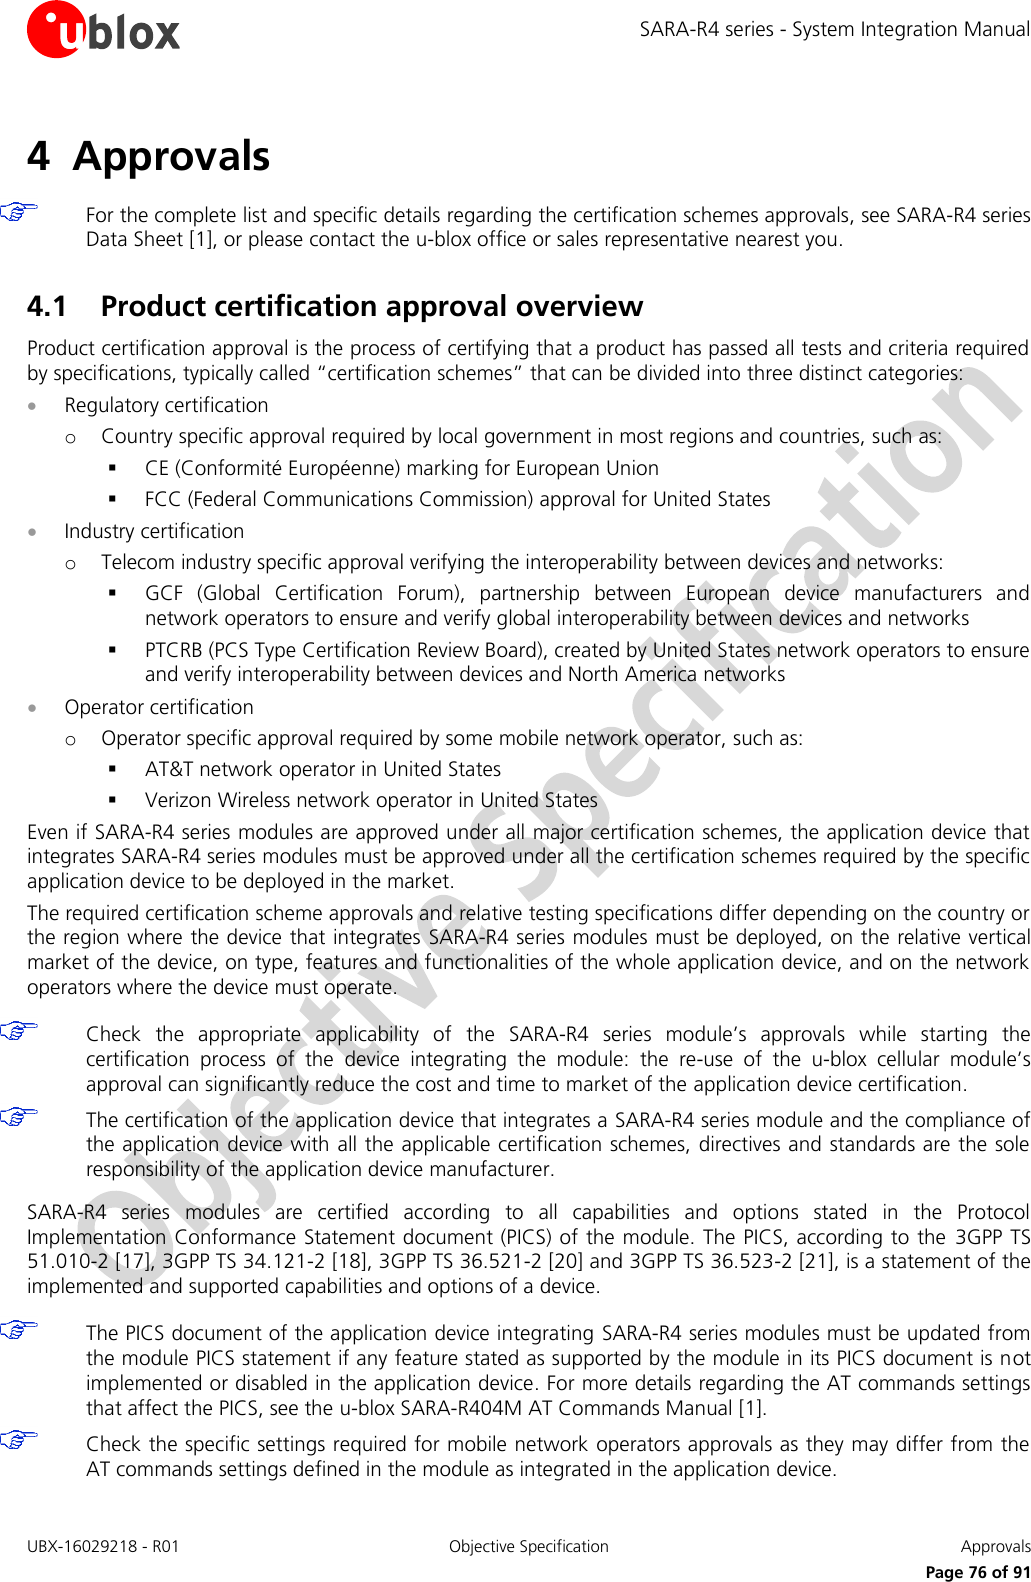 SARA-R4 series - System Integration Manual UBX-16029218 - R01  Objective Specification  Approvals     Page 76 of 91 4 Approvals   For the complete list and specific details regarding the certification schemes approvals, see SARA-R4 series Data Sheet [1], or please contact the u-blox office or sales representative nearest you.  4.1 Product certification approval overview Product certification approval is the process of certifying that a product has passed all tests and criteria required by specifications, typically called “certification schemes” that can be divided into three distinct categories:  Regulatory certification o Country specific approval required by local government in most regions and countries, such as:  CE (Conformité Européenne) marking for European Union  FCC (Federal Communications Commission) approval for United States  Industry certification o Telecom industry specific approval verifying the interoperability between devices and networks:  GCF  (Global  Certification  Forum),  partnership  between  European  device  manufacturers  and network operators to ensure and verify global interoperability between devices and networks  PTCRB (PCS Type Certification Review Board), created by United States network operators to ensure and verify interoperability between devices and North America networks  Operator certification o Operator specific approval required by some mobile network operator, such as:  AT&amp;T network operator in United States  Verizon Wireless network operator in United States Even if SARA-R4 series modules are approved under all major certification schemes, the application device that integrates SARA-R4 series modules must be approved under all the certification schemes required by the specific application device to be deployed in the market. The required certification scheme approvals and relative testing specifications differ depending on the country or the region where the device that integrates SARA-R4 series modules must be deployed, on the relative vertical market of the device, on type, features and functionalities of the whole application device, and on the network operators where the device must operate.   Check  the  appropriate  applicability  of  the  SARA-R4  series  module’s  approvals  while  starting  the certification  process  of  the  device  integrating  the  module:  the  re-use  of  the  u-blox  cellular  module’s approval can significantly reduce the cost and time to market of the application device certification.  The certification of the application device that integrates a SARA-R4 series module and the compliance of the application device with all the applicable certification schemes, directives and standards are the sole responsibility of the application device manufacturer.  SARA-R4  series  modules  are  certified  according  to  all  capabilities  and  options  stated  in  the  Protocol Implementation Conformance Statement document (PICS) of the module. The PICS, according to the  3GPP TS 51.010-2 [17], 3GPP TS 34.121-2 [18], 3GPP TS 36.521-2 [20] and 3GPP TS 36.523-2 [21], is a statement of the implemented and supported capabilities and options of a device.   The PICS document of the application device integrating SARA-R4 series modules must be updated from the module PICS statement if any feature stated as supported by the module in its PICS document is not implemented or disabled in the application device. For more details regarding the AT commands settings that affect the PICS, see the u-blox SARA-R404M AT Commands Manual [1].  Check the specific settings required for mobile network operators approvals as they may differ from the AT commands settings defined in the module as integrated in the application device.  